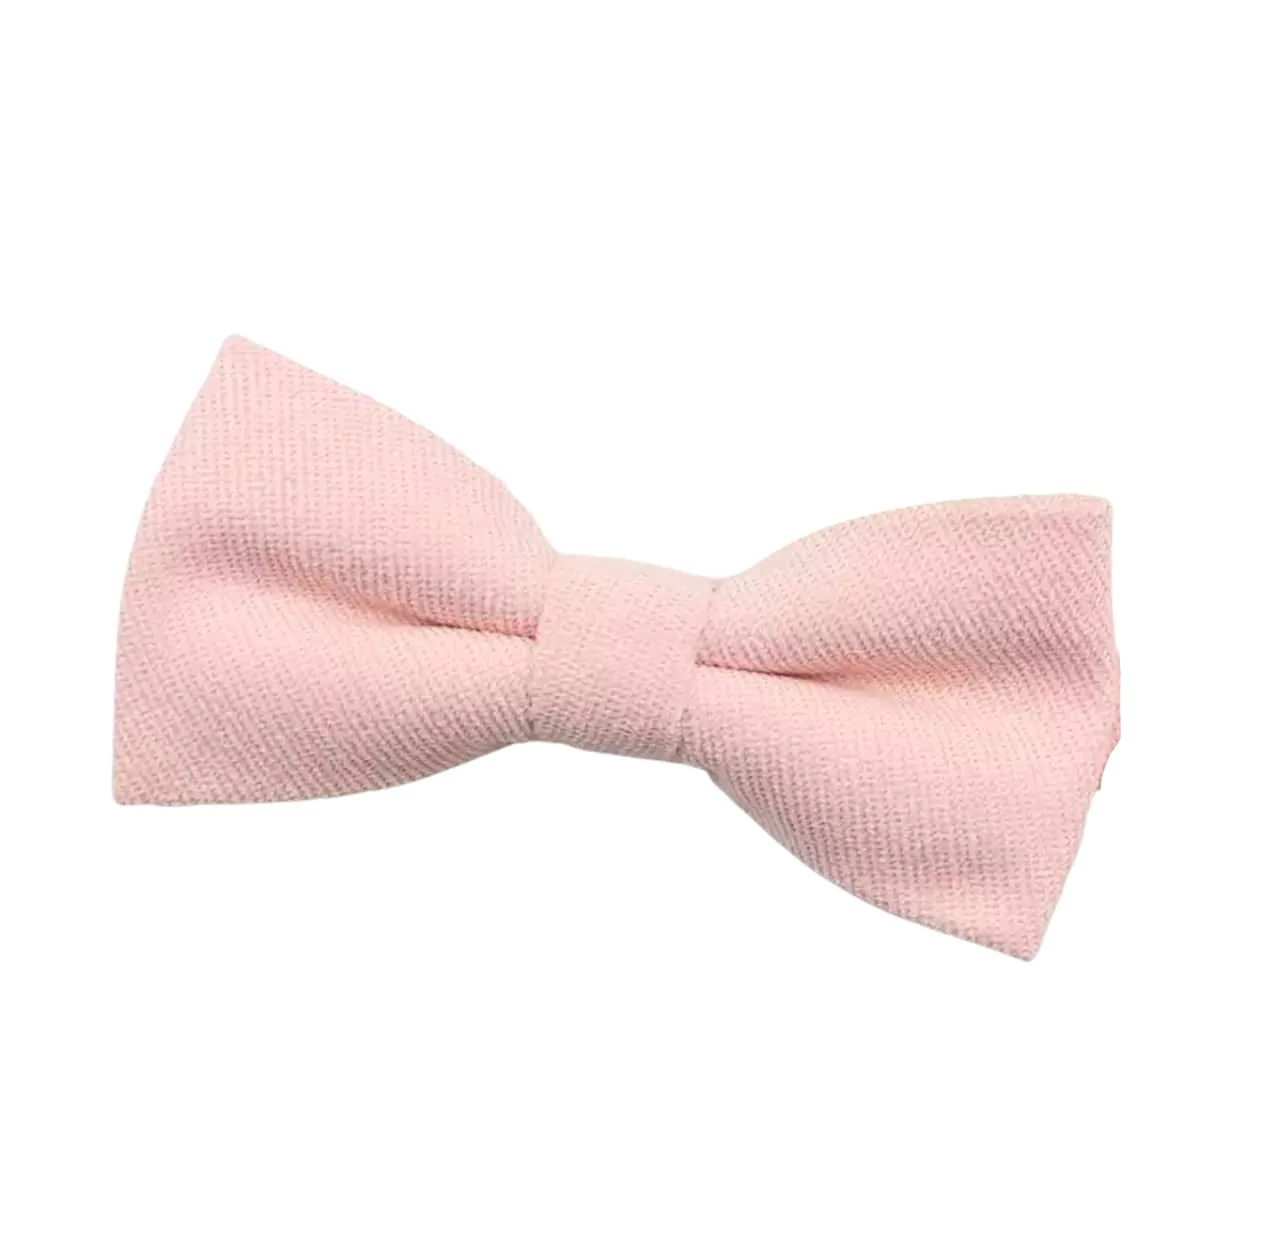 Pink Kids floral bow tie (Pre Tied) - Ring bearers-Pink Kids floral bow tie Strap is adjustablePre-Tied bowtieBow Tie 10.5 * 6CM Color: PINK Great for: Ring bearers Children &amp; Boys Wedding Shoots Formal Prom Fancy Parties Gifts and presents Pink bow tie for babies and children for weddings and events. Great for ring bearers. Fancy events. Pink suede pre tied bow ties for toddlers kids. Pink bow tie for kids weddings and events Baby bow ties for boys toddlers kids Mytieshop bow tie Pink bow tie f